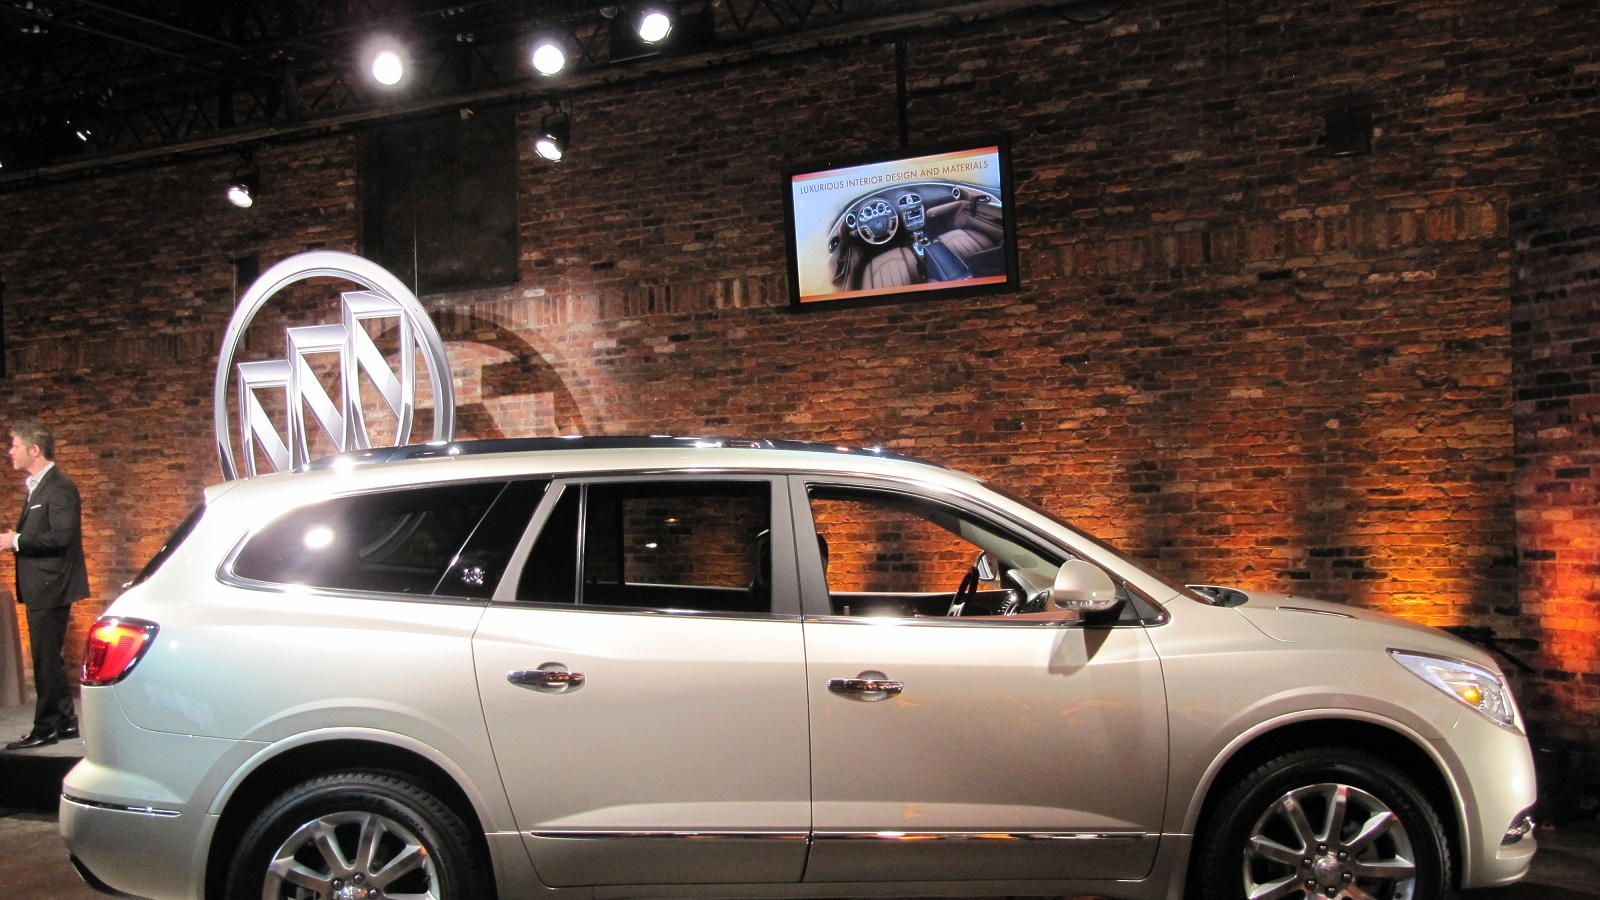 2013 Buick Enclave launch event before New York Auto Show, April 2012